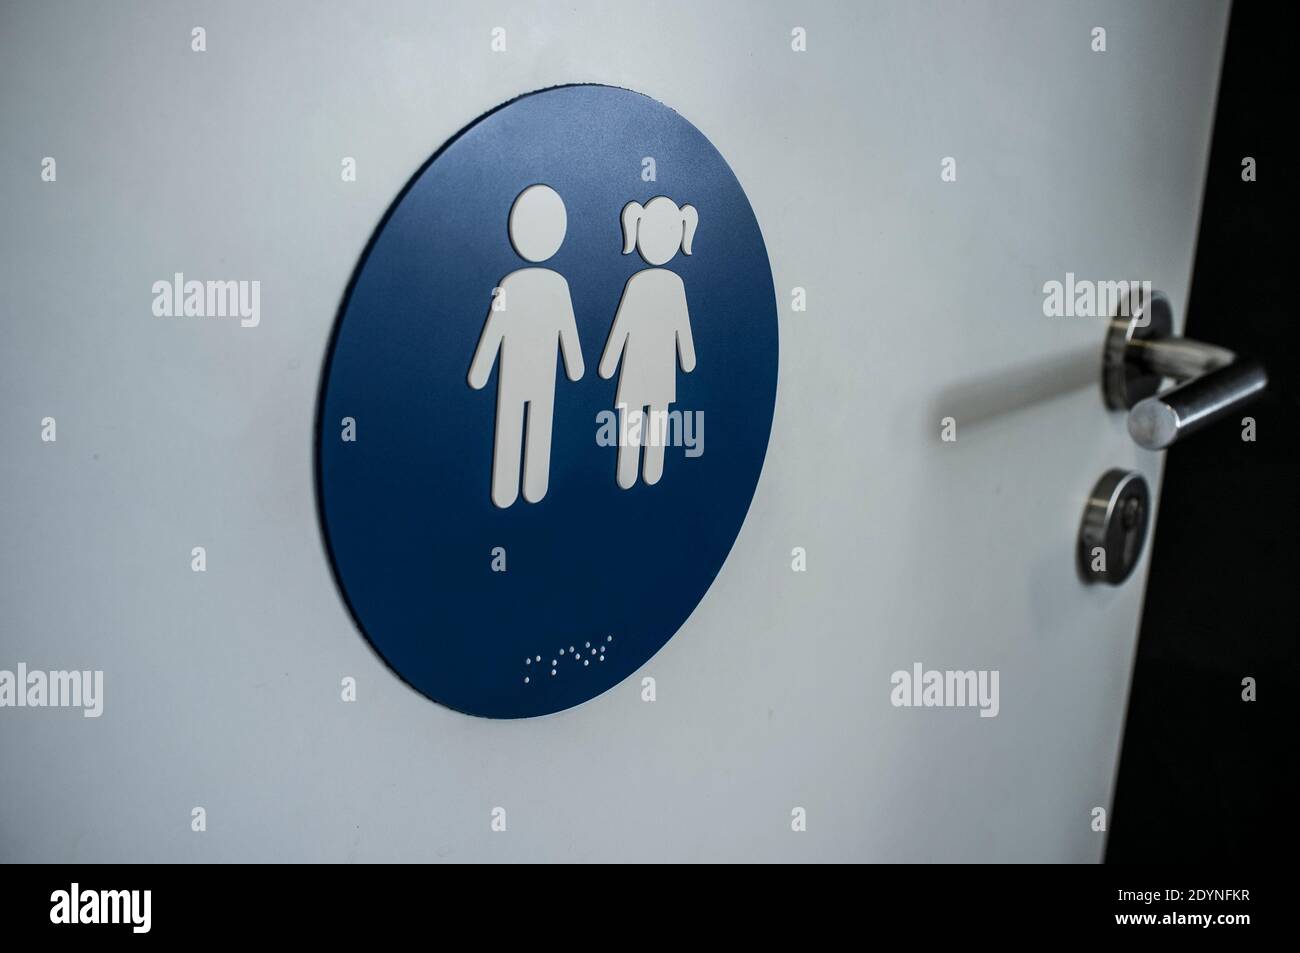 Door decal for children toilet. Sticker placed at eye-level with text caption in braille language Stock Photo